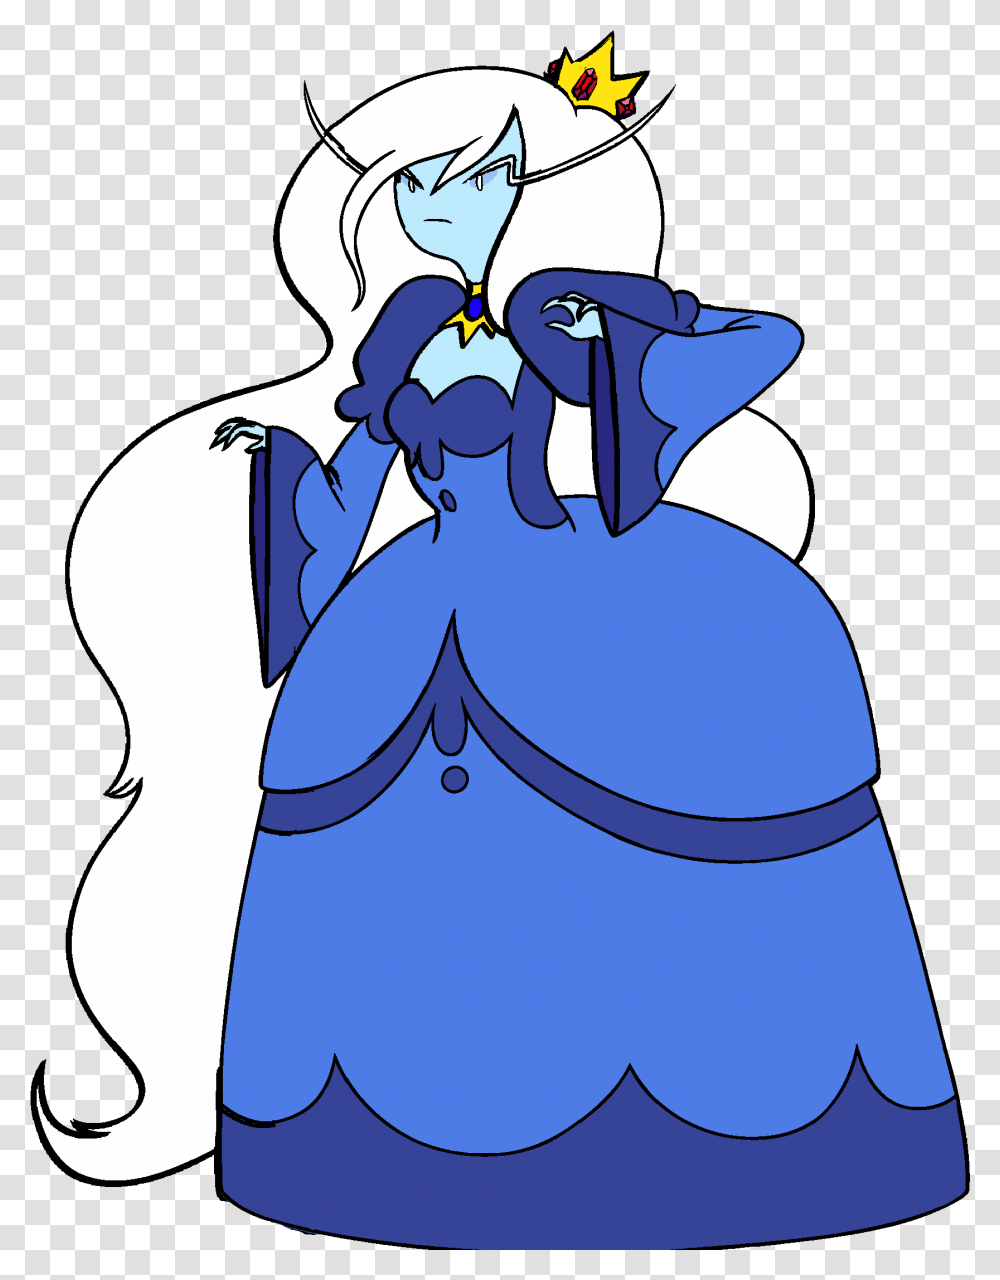 Adventure Time With Finn And Jake Wiki Ice Queen From Adventure Time, Hood Transparent Png